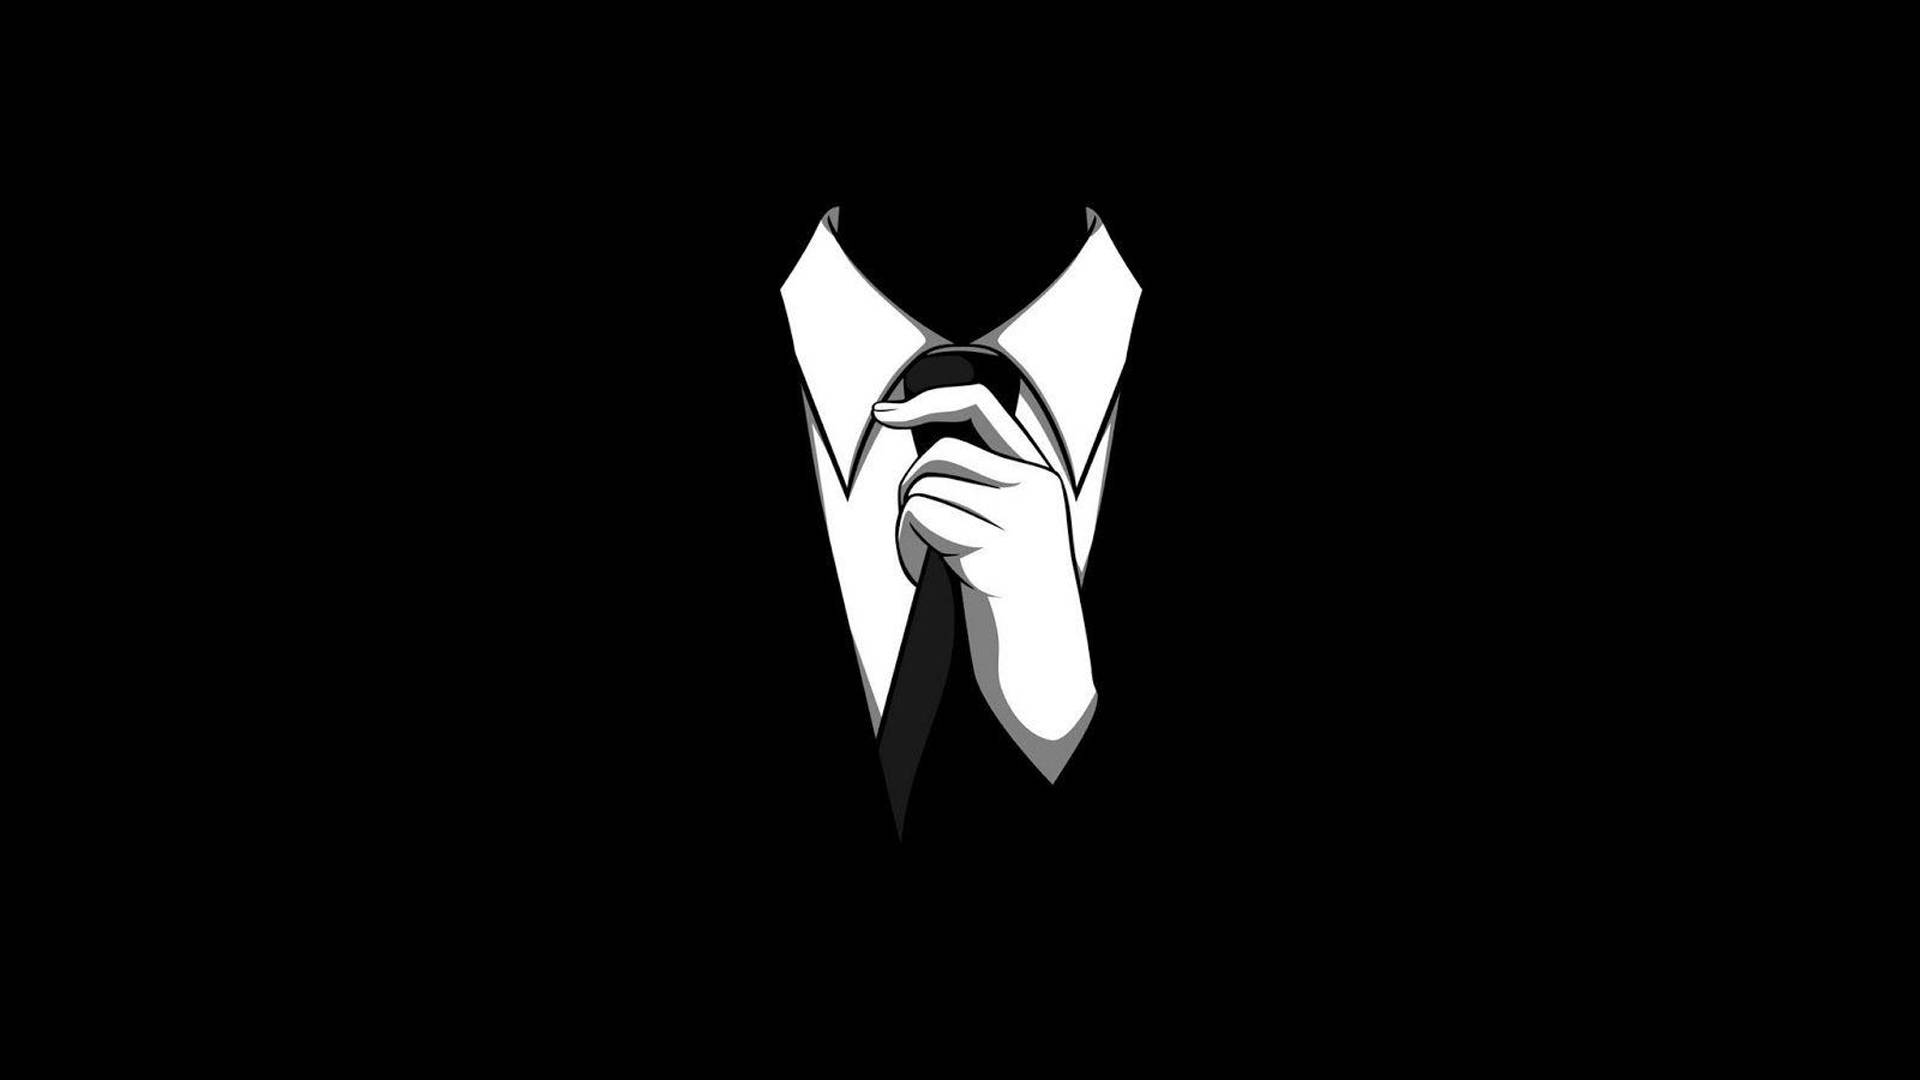 Black And White Hd Suit Graphic Art Wallpaper